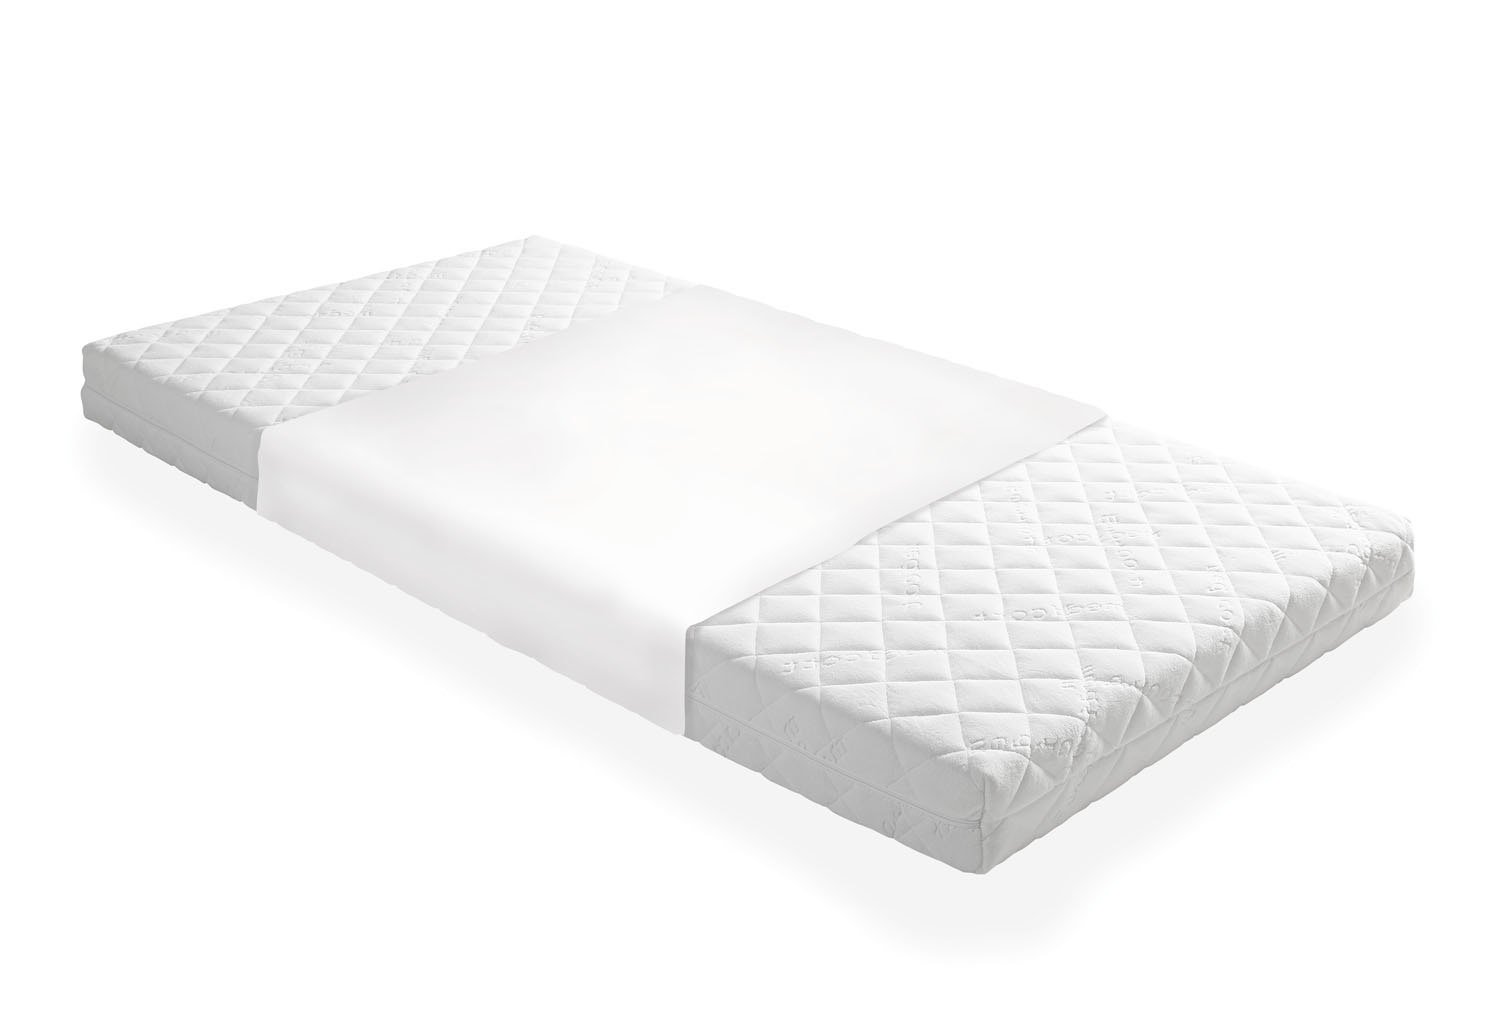 waterproof mattress cover for pets do you need